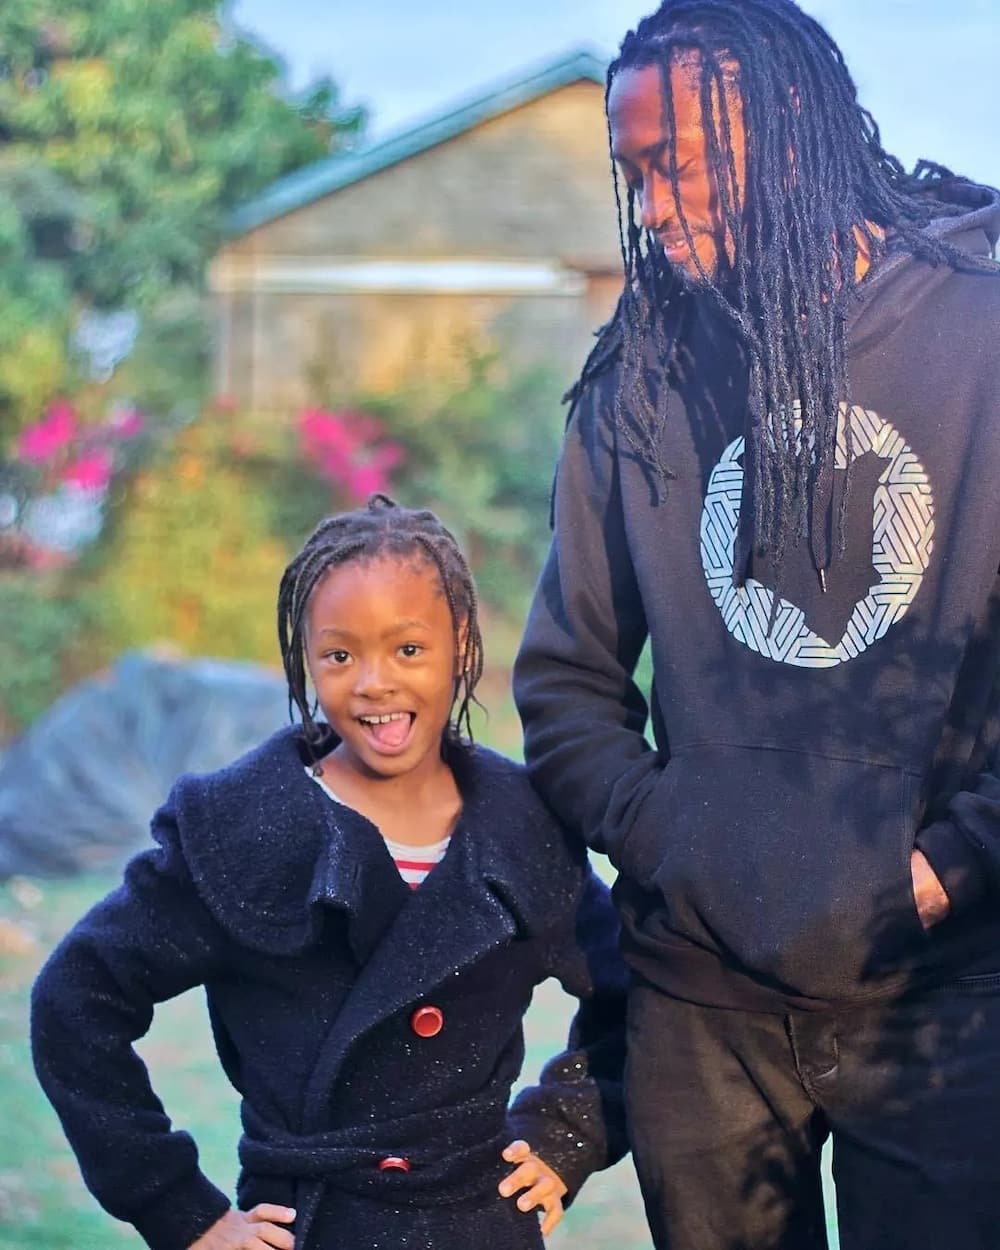 Meet celebrated gospel producer J blessing's look alike daughter who shares names with his ex-lover